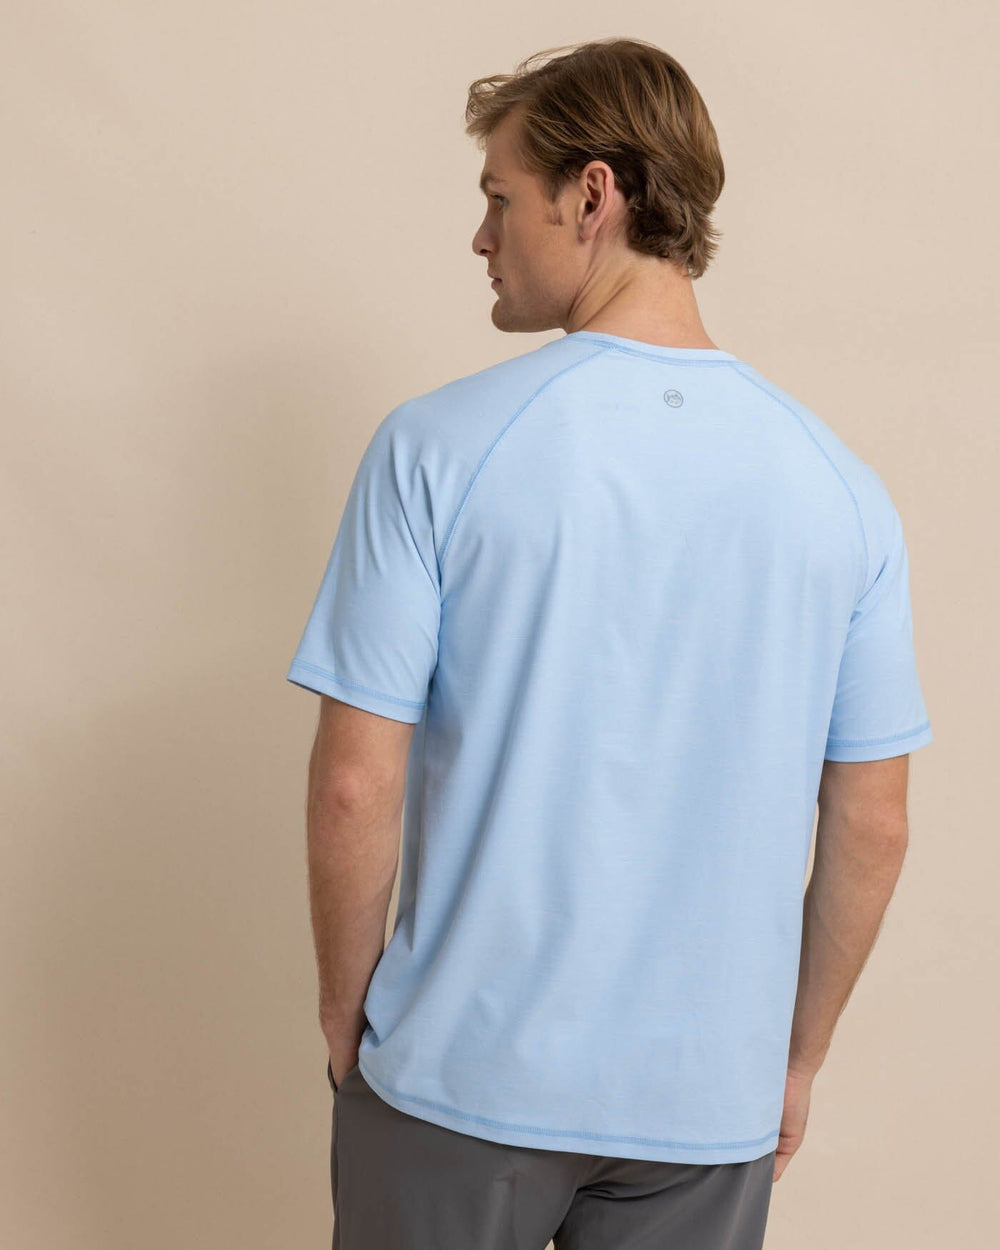 The back view of the Southern Tide brrr illiant Performance T-Shirt by Southern Tide - Clearwater Blue